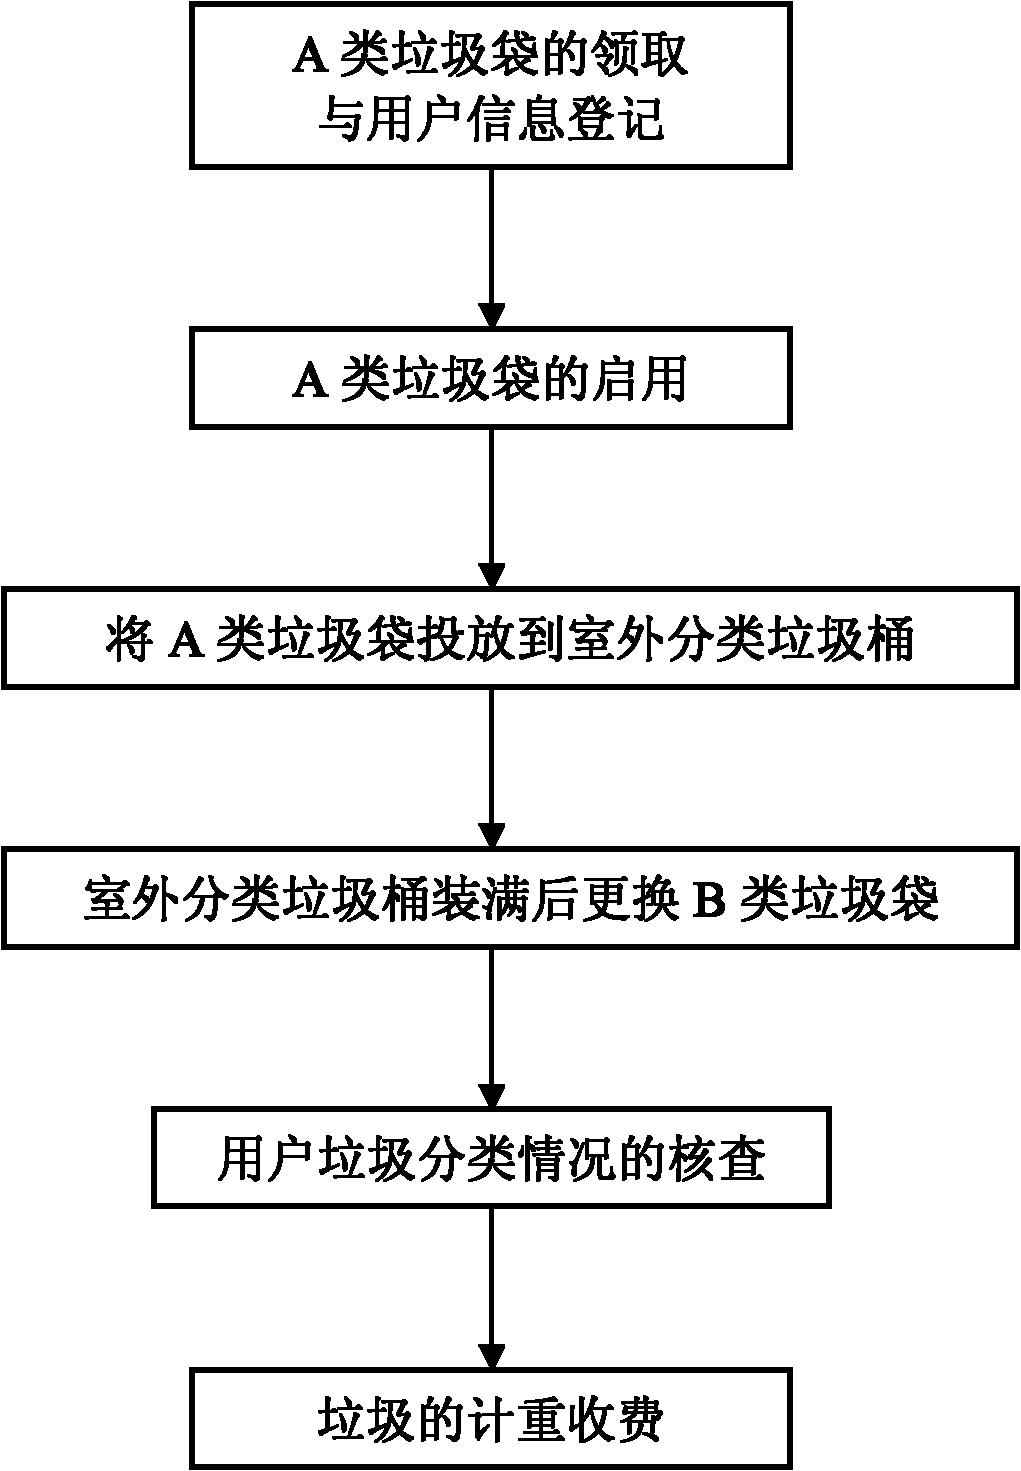 Household garbage separate collection method and system